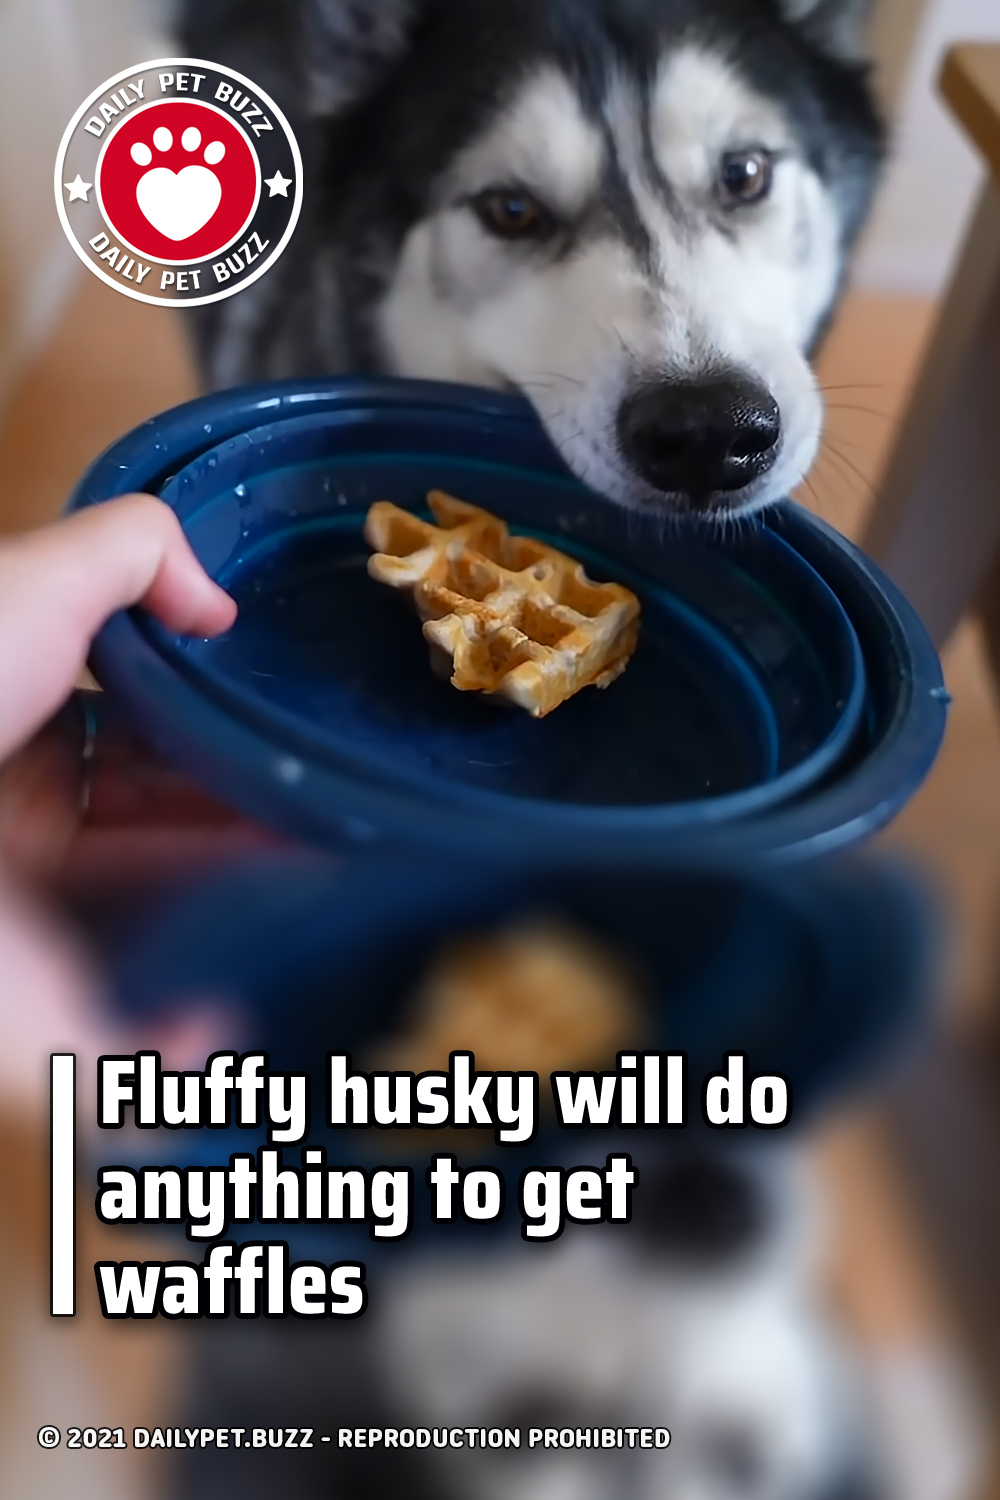 Fluffy husky will do anything to get waffles